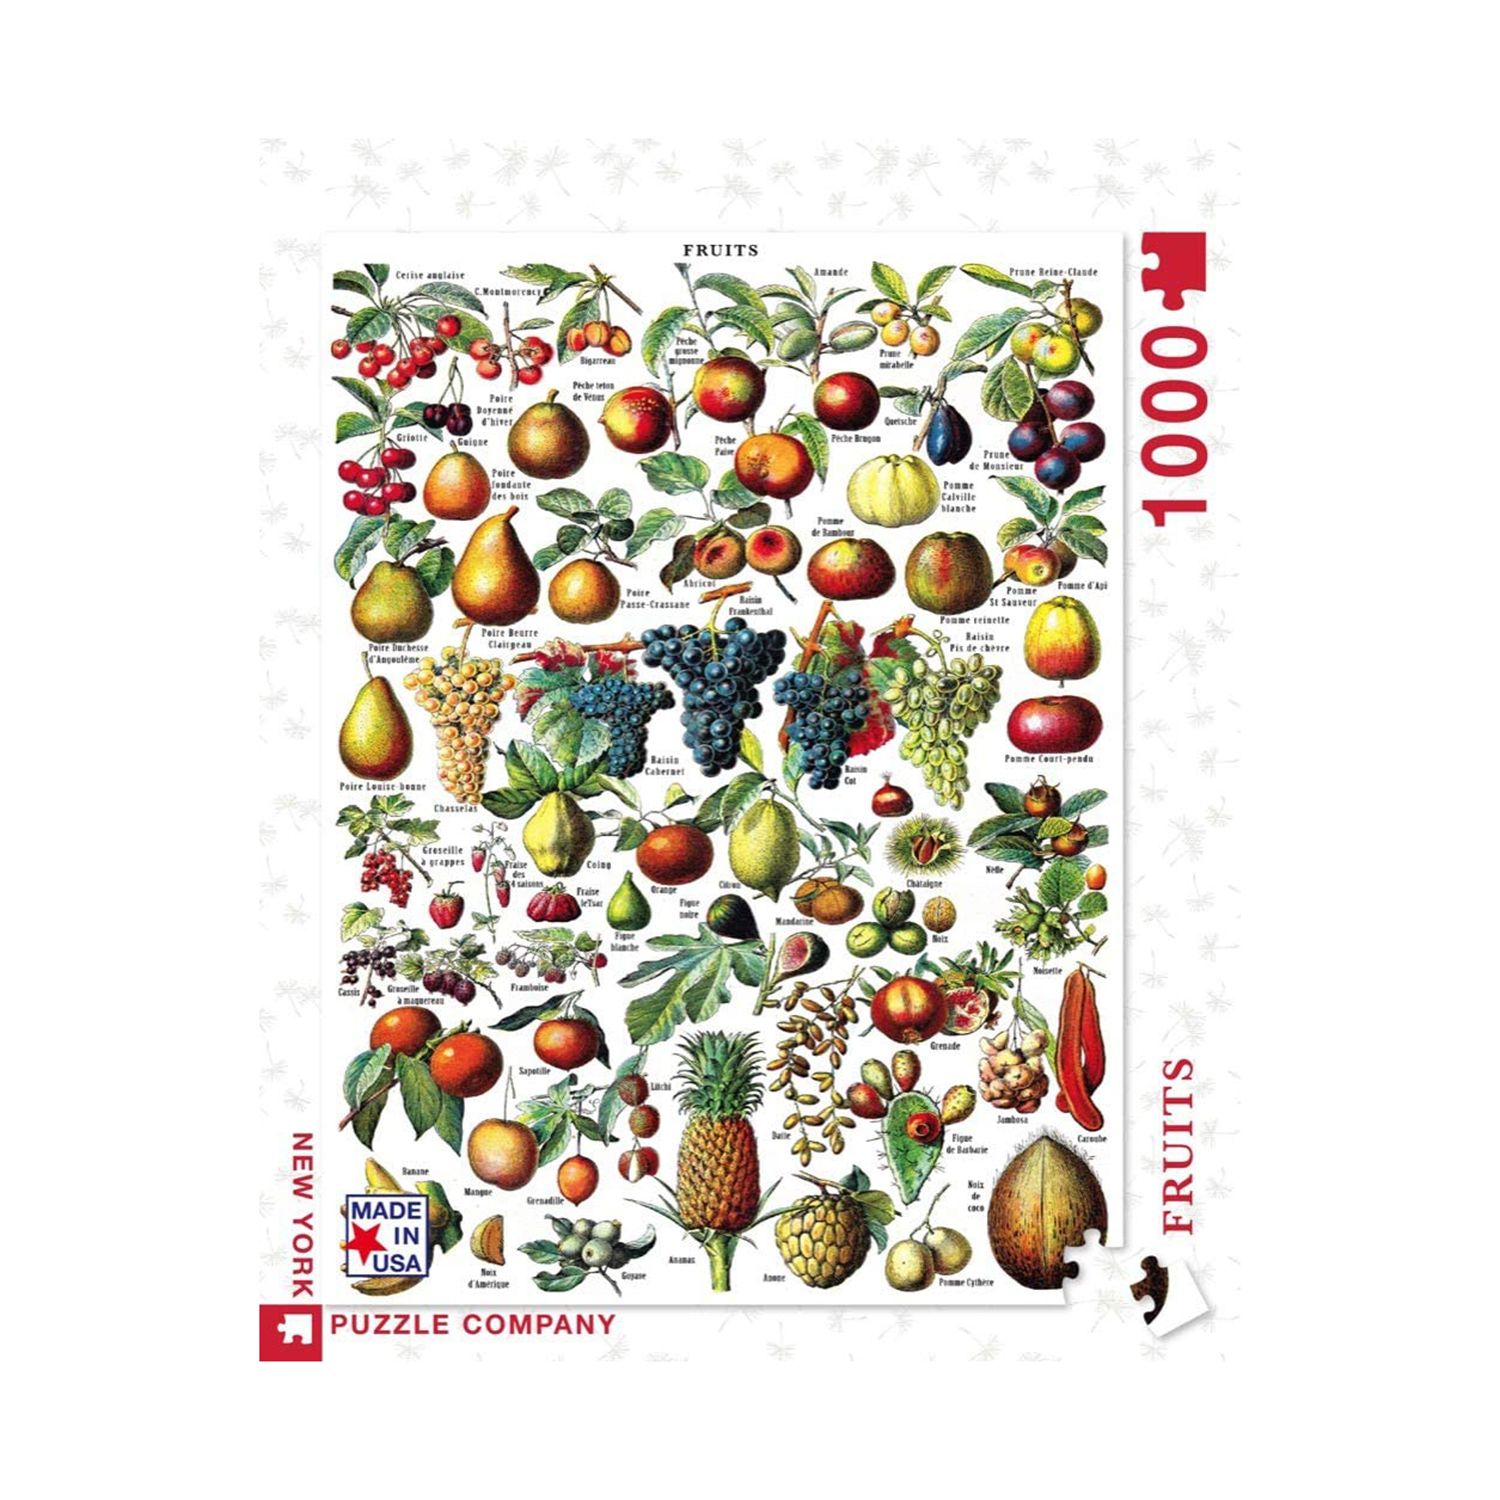 New York Puzzle Company - Vintage Images Fruits